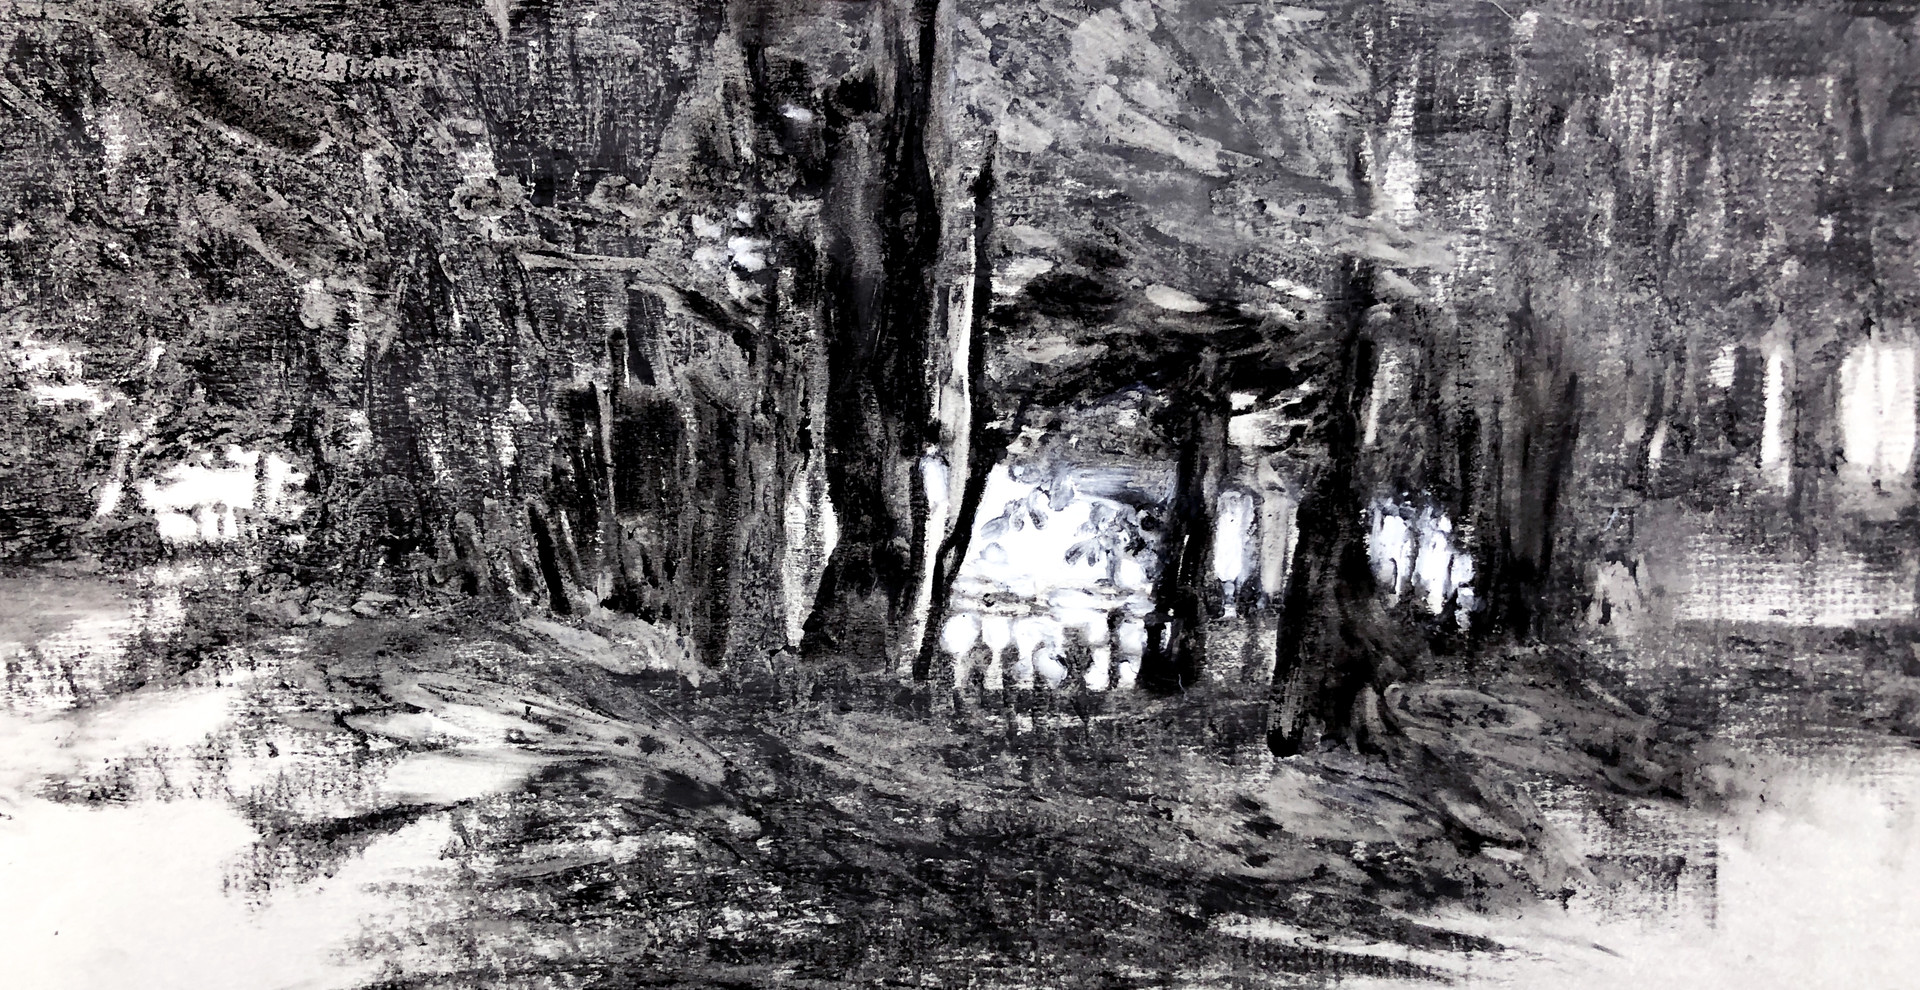 <span style="font-size: 14px; font-family: 'Gilroy' !important;">내가 바라는 틈,29.1x15.4, oil pastel on tracing paper, 2020 - 강연이</span>